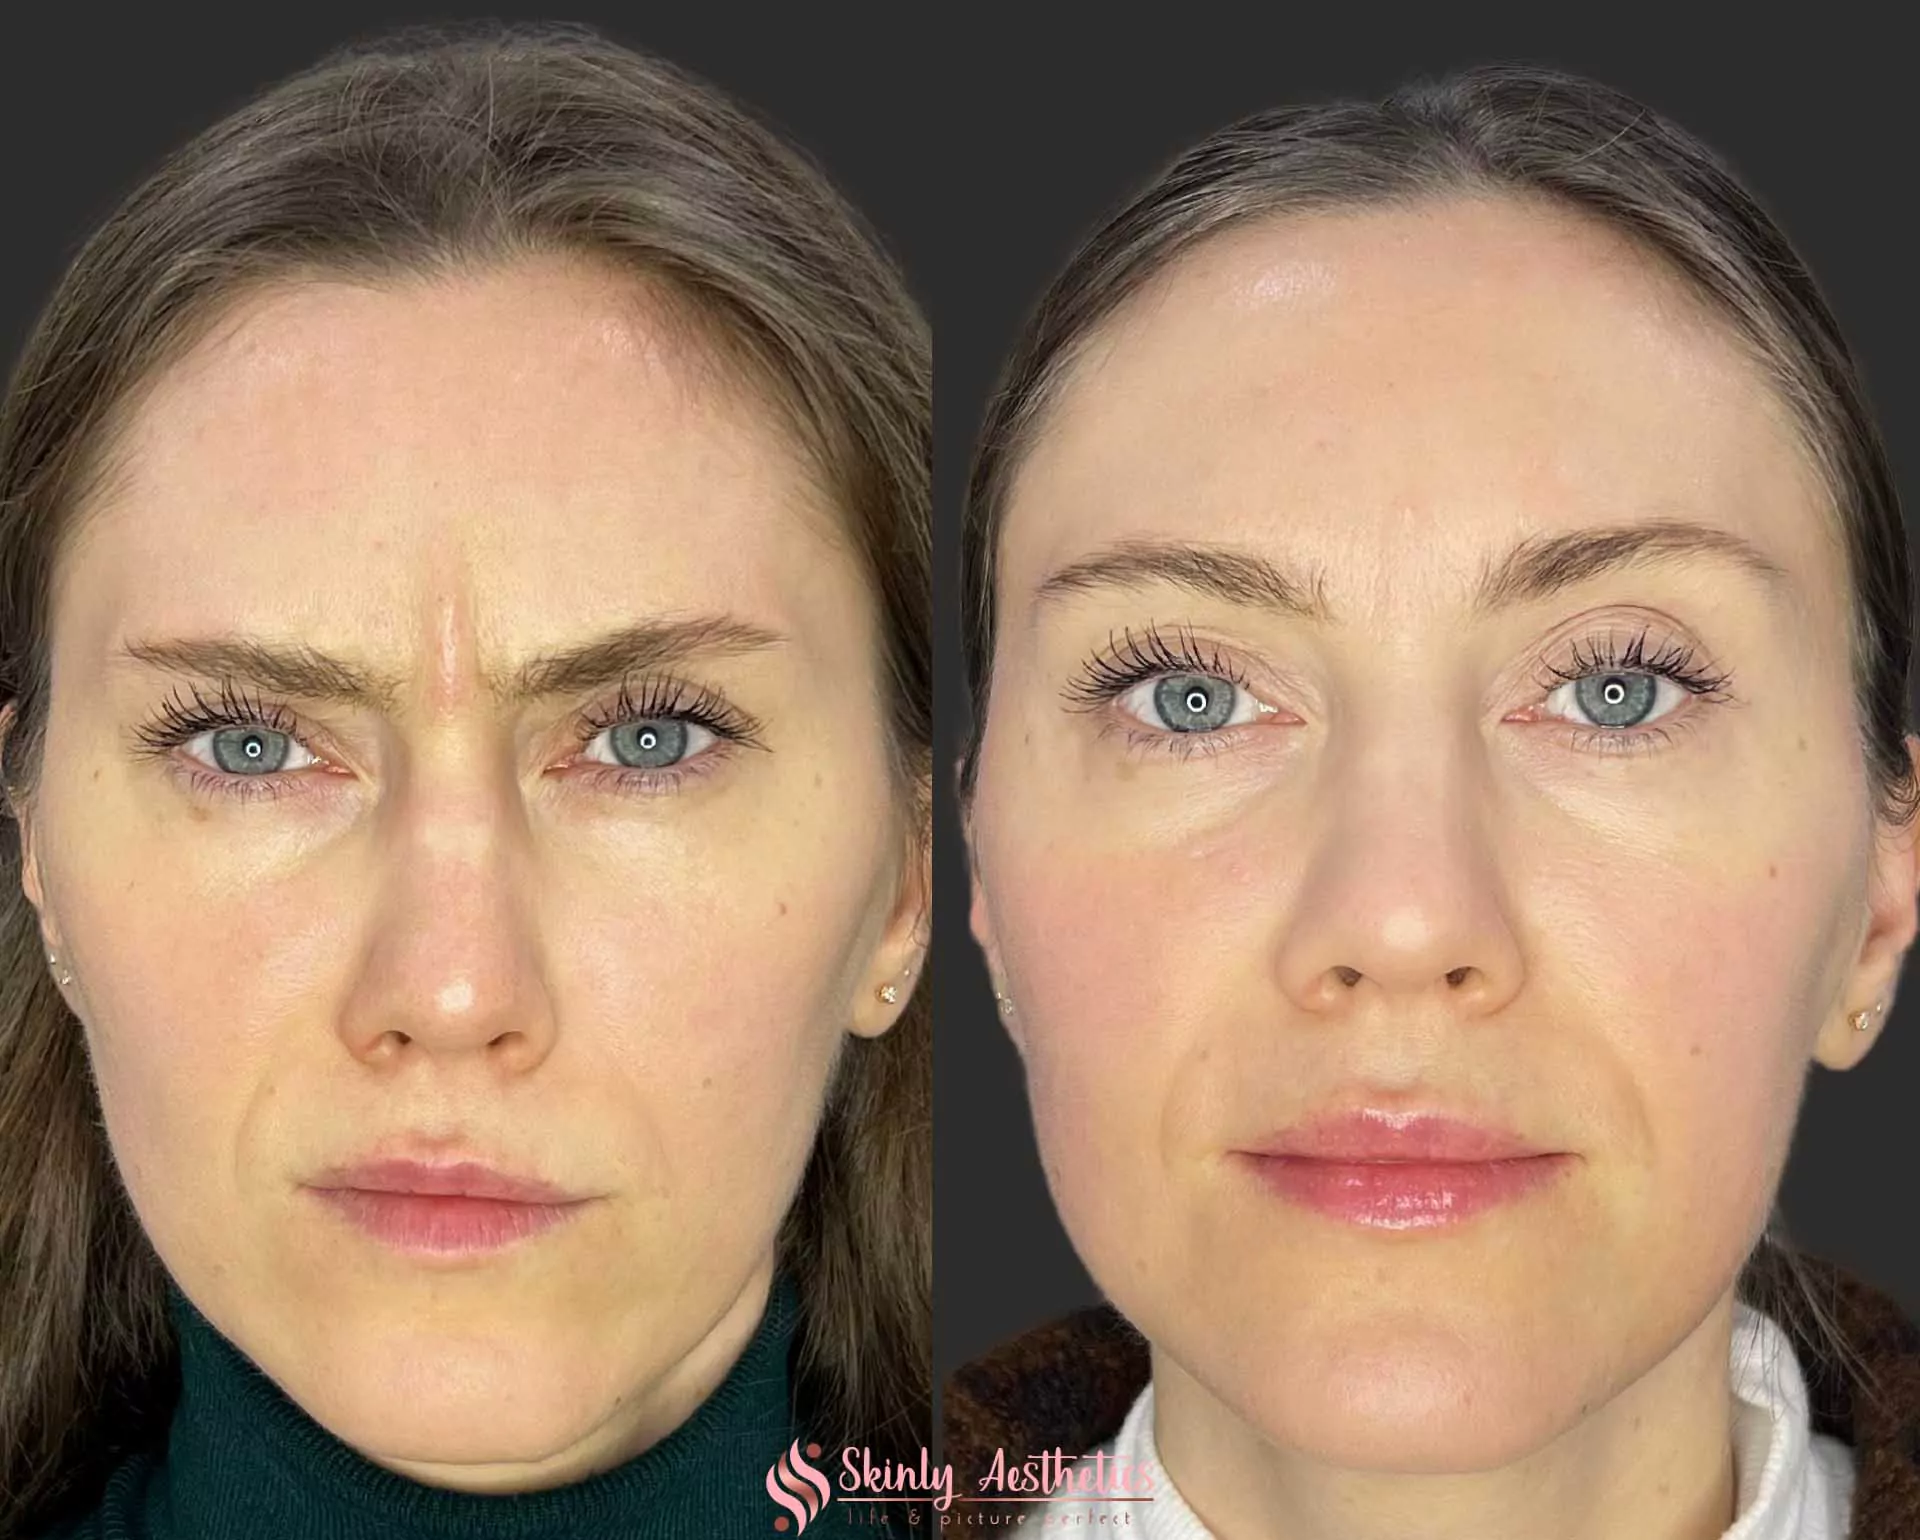 20 units of Botox to prevent frown lines